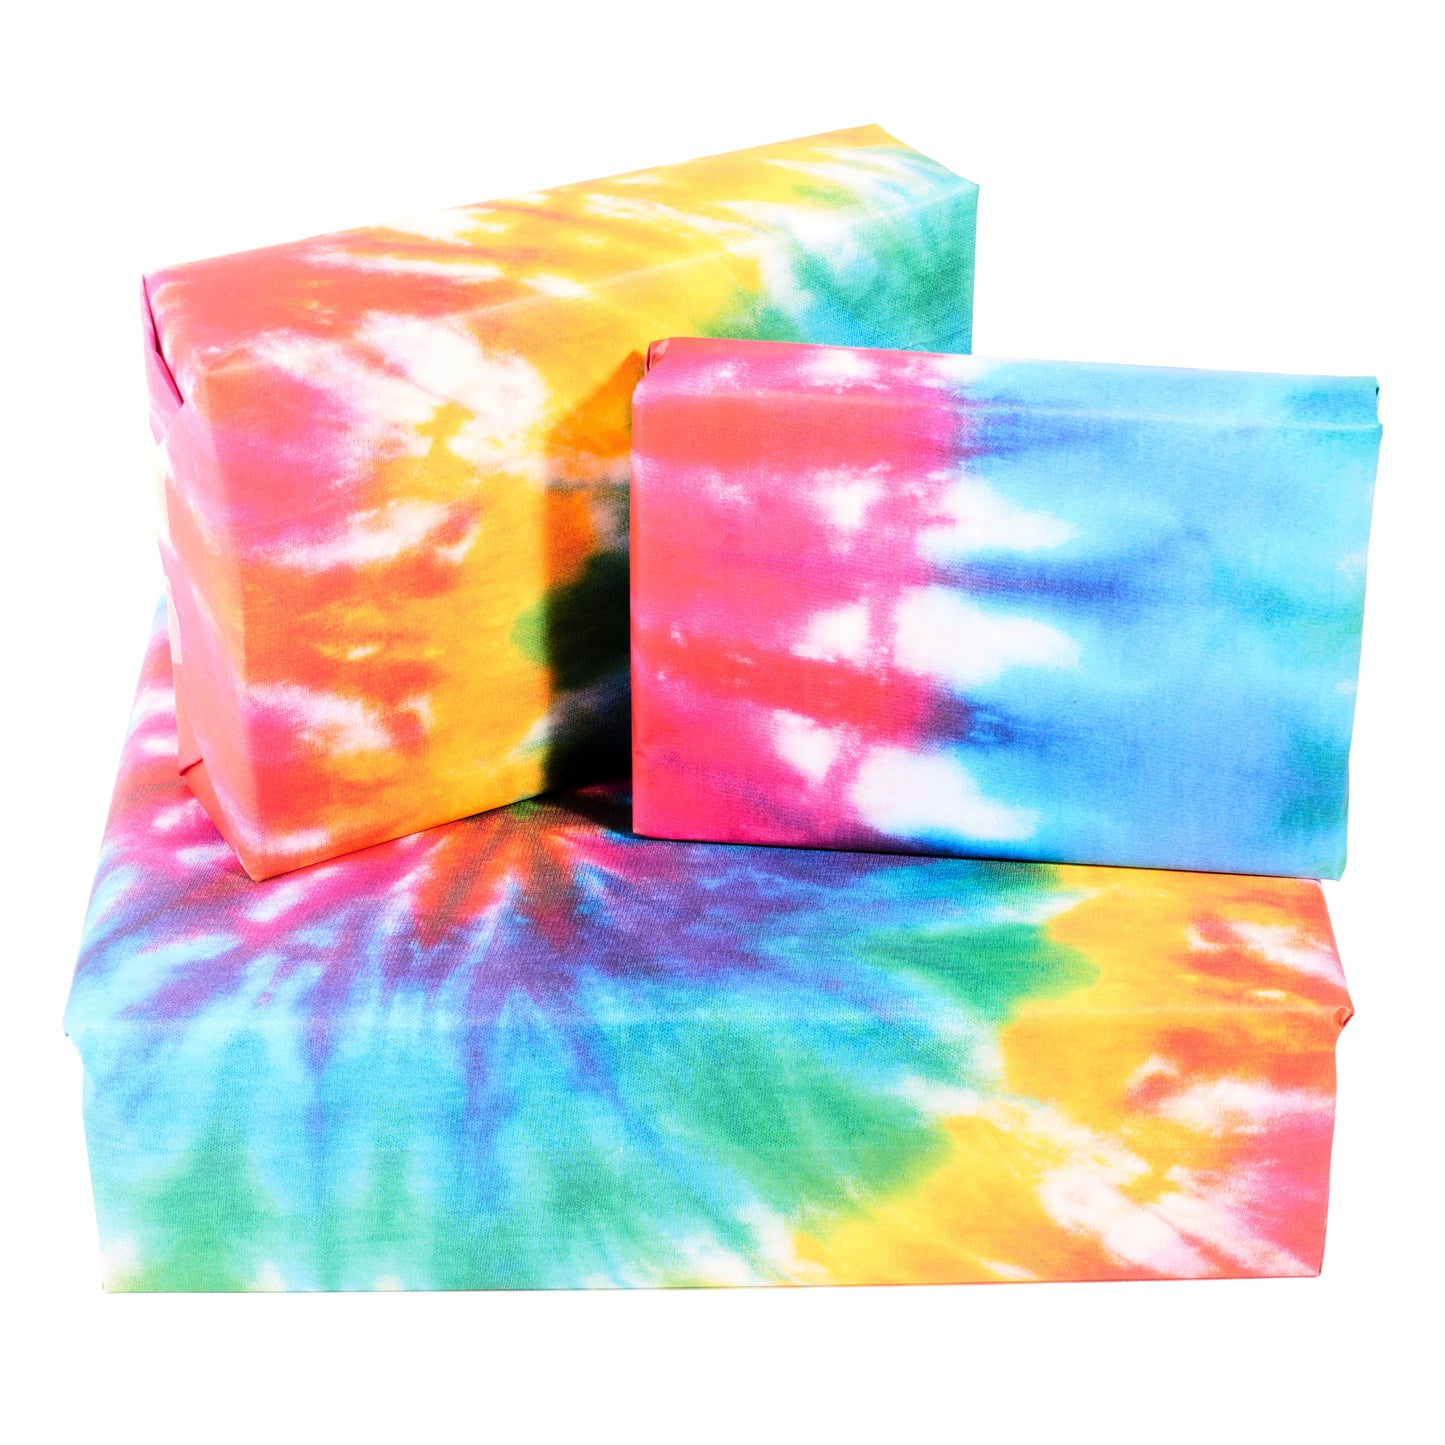 Tie Dye Wrapping Paper - 6 Sheets of Gift Wrap - 'Tie Dye' - Colorful Gift Wrap - For Men Women Him Her Boys Girls Kids